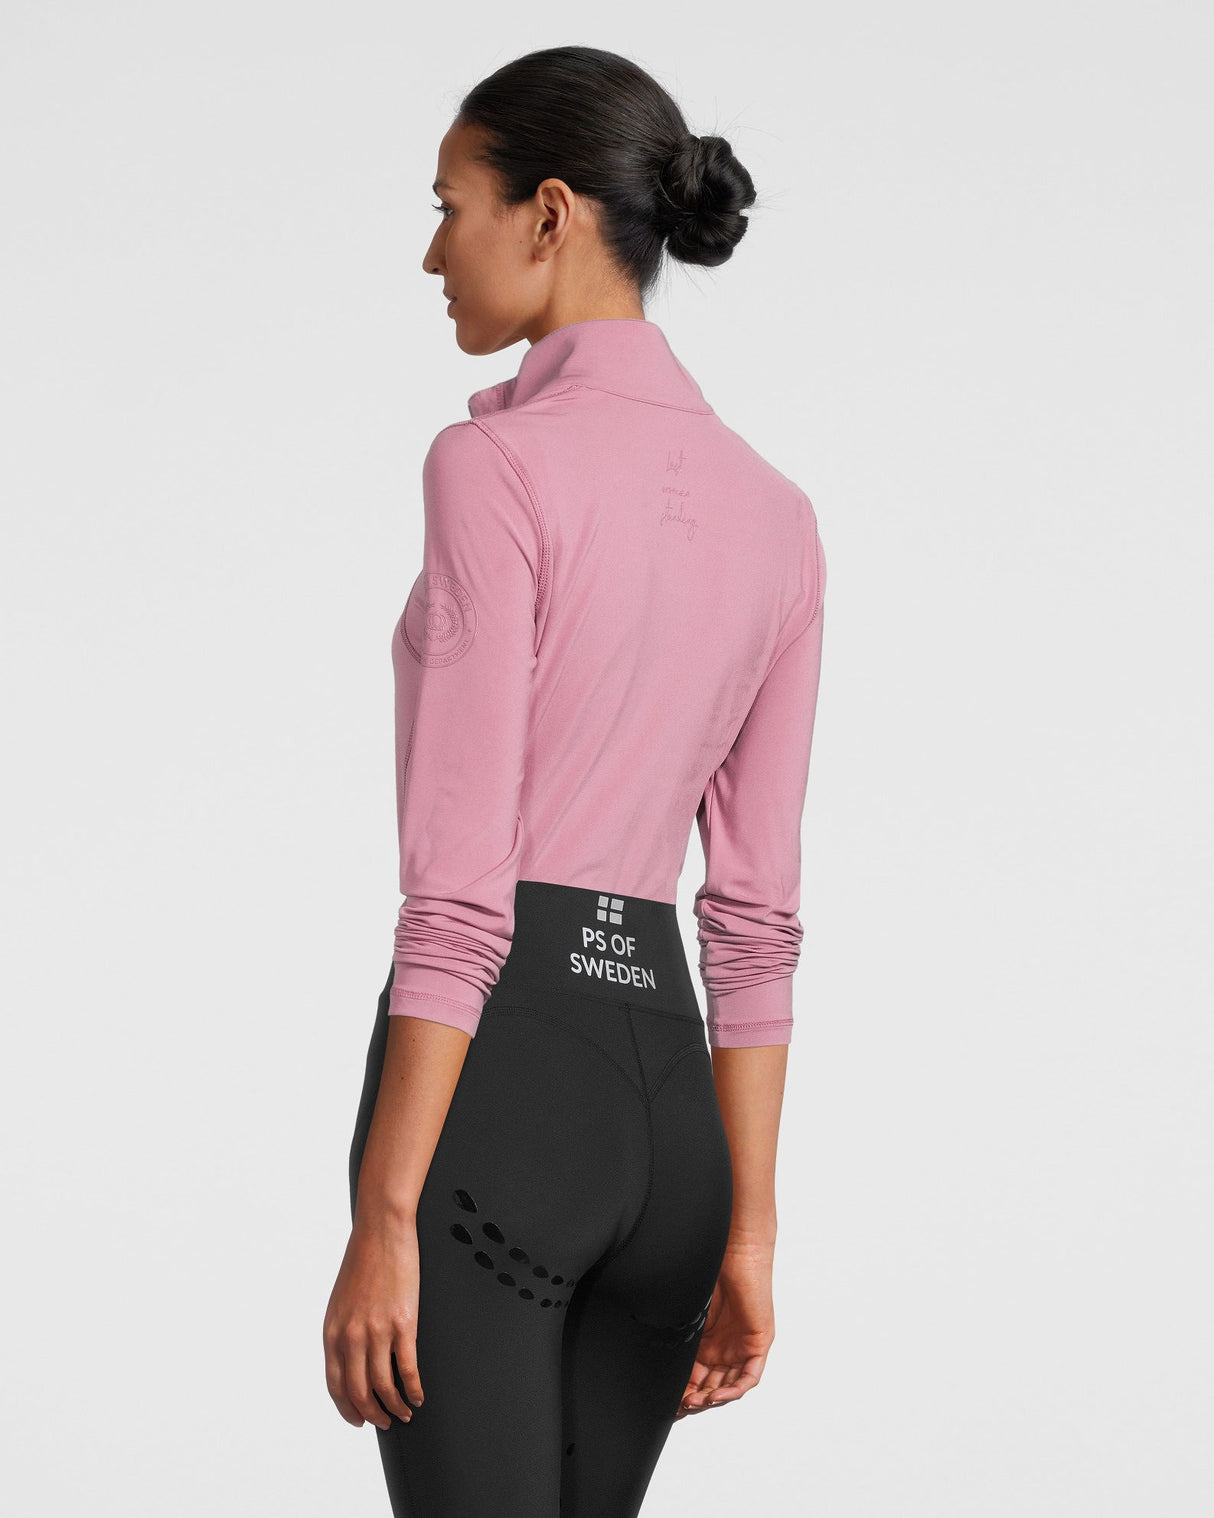 PS of Sweden Alessandra Base Layer Roseberry